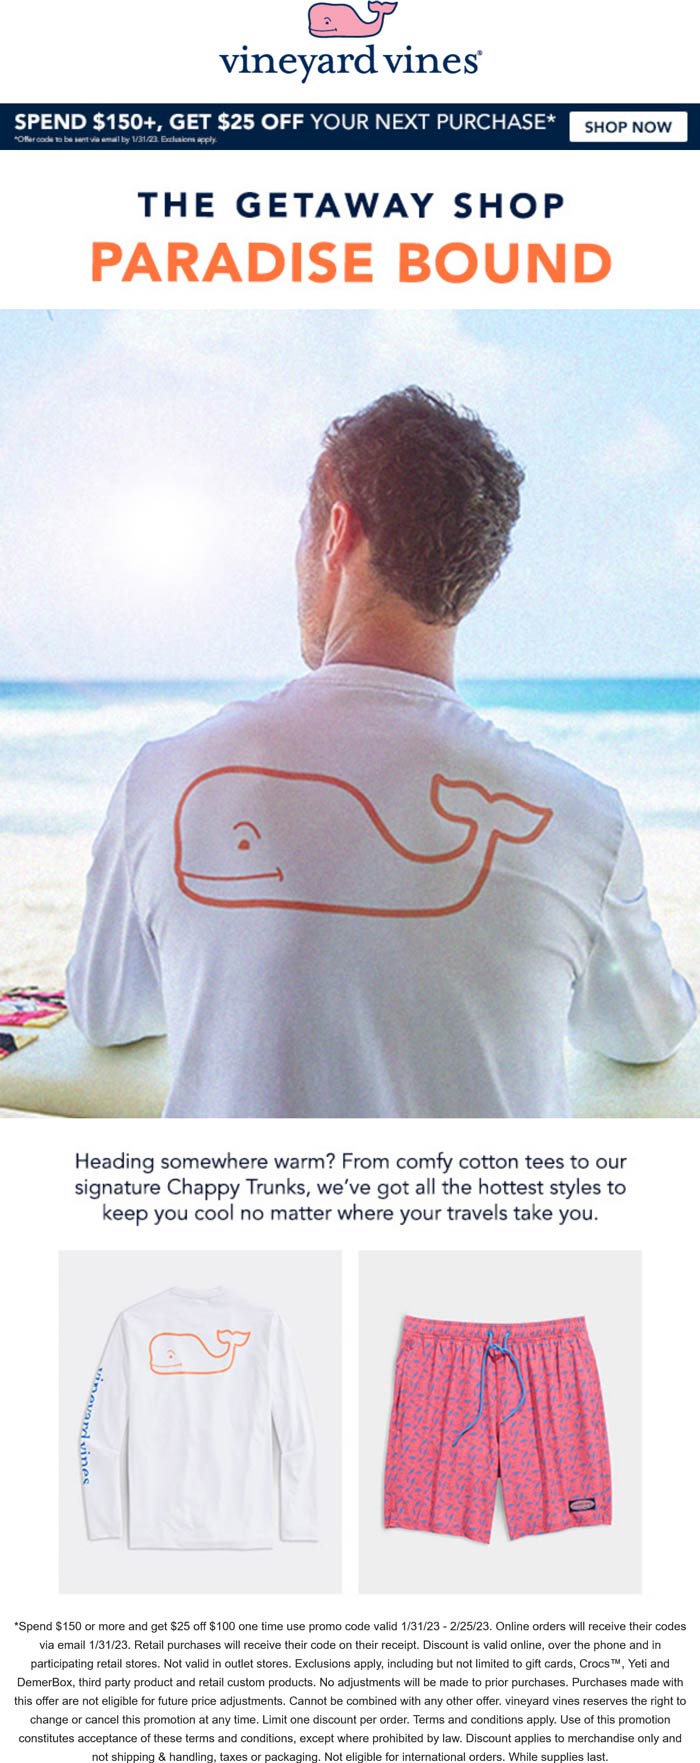 Vineyard Vines coupons & promo code for [January 2023]